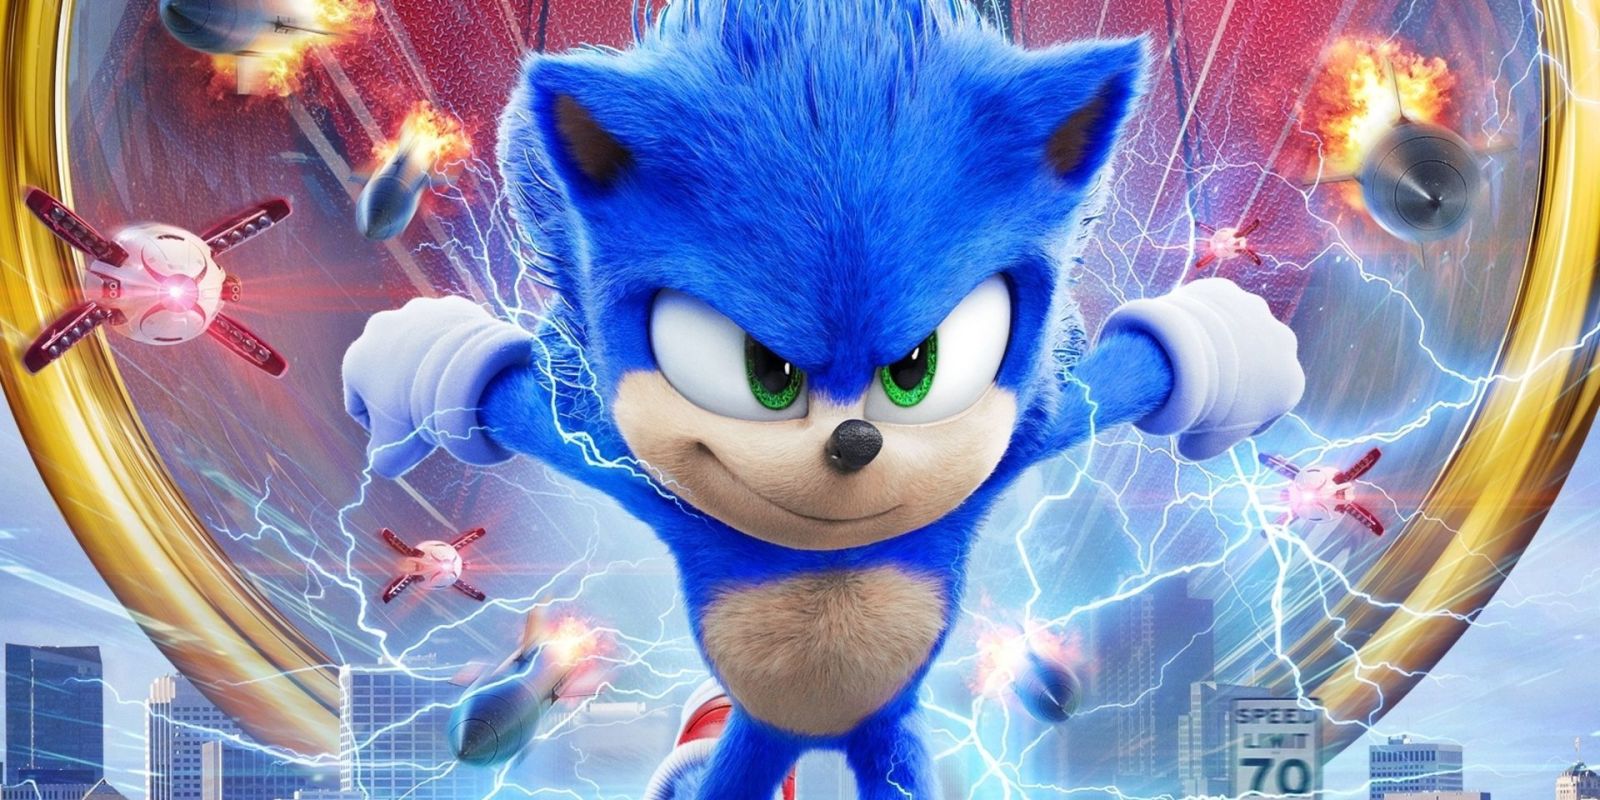 Fandango - Another new poster for the Sonic movie!